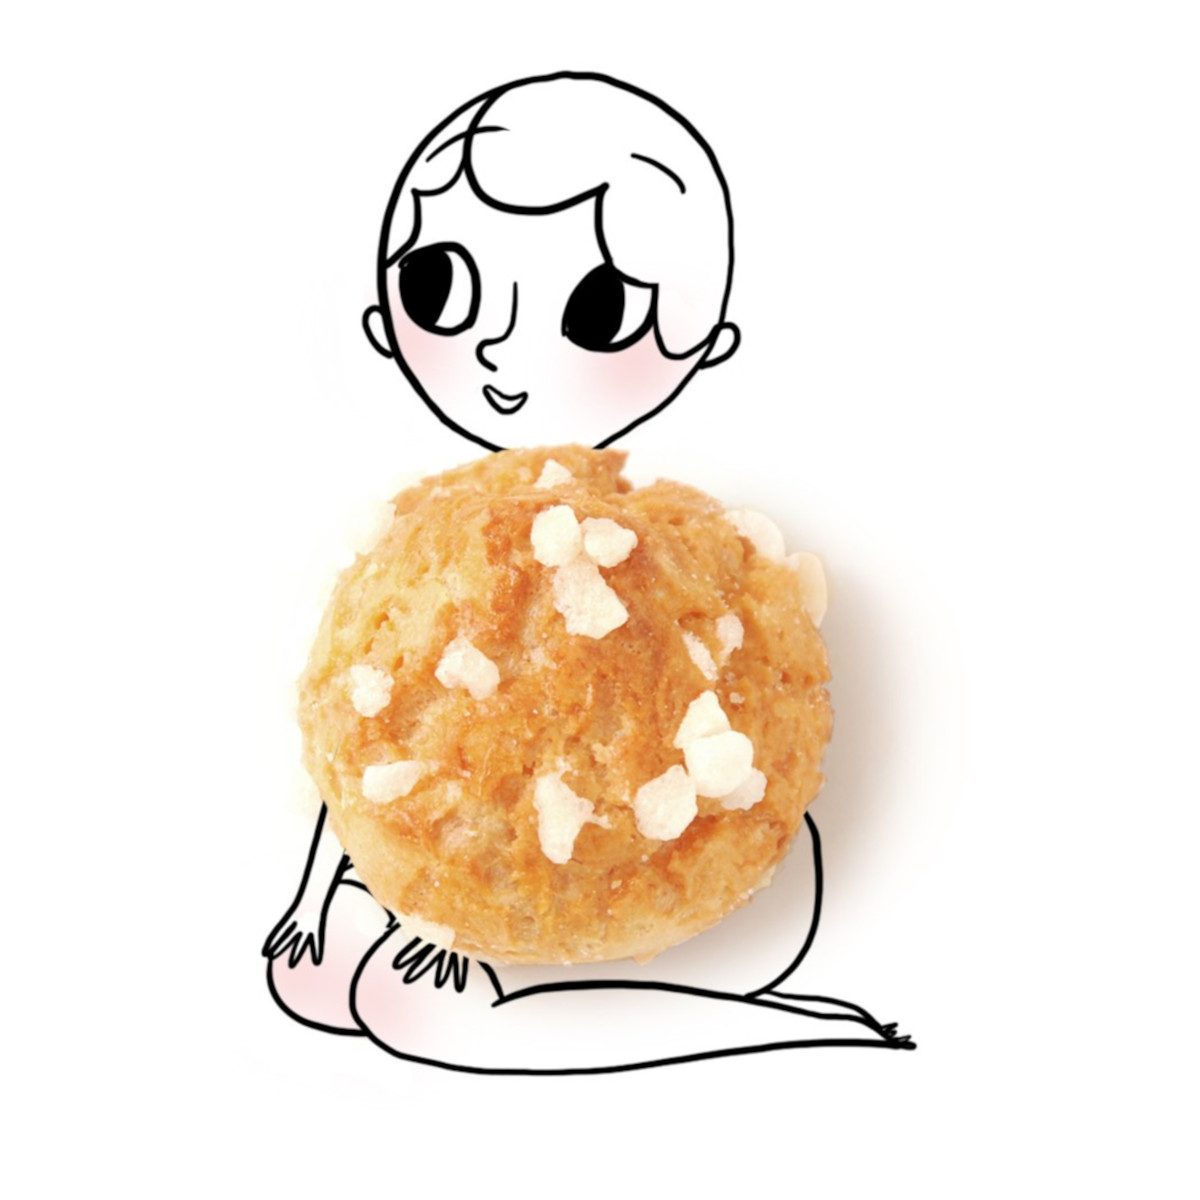 Adolie Day illustration with French pastry chouquette